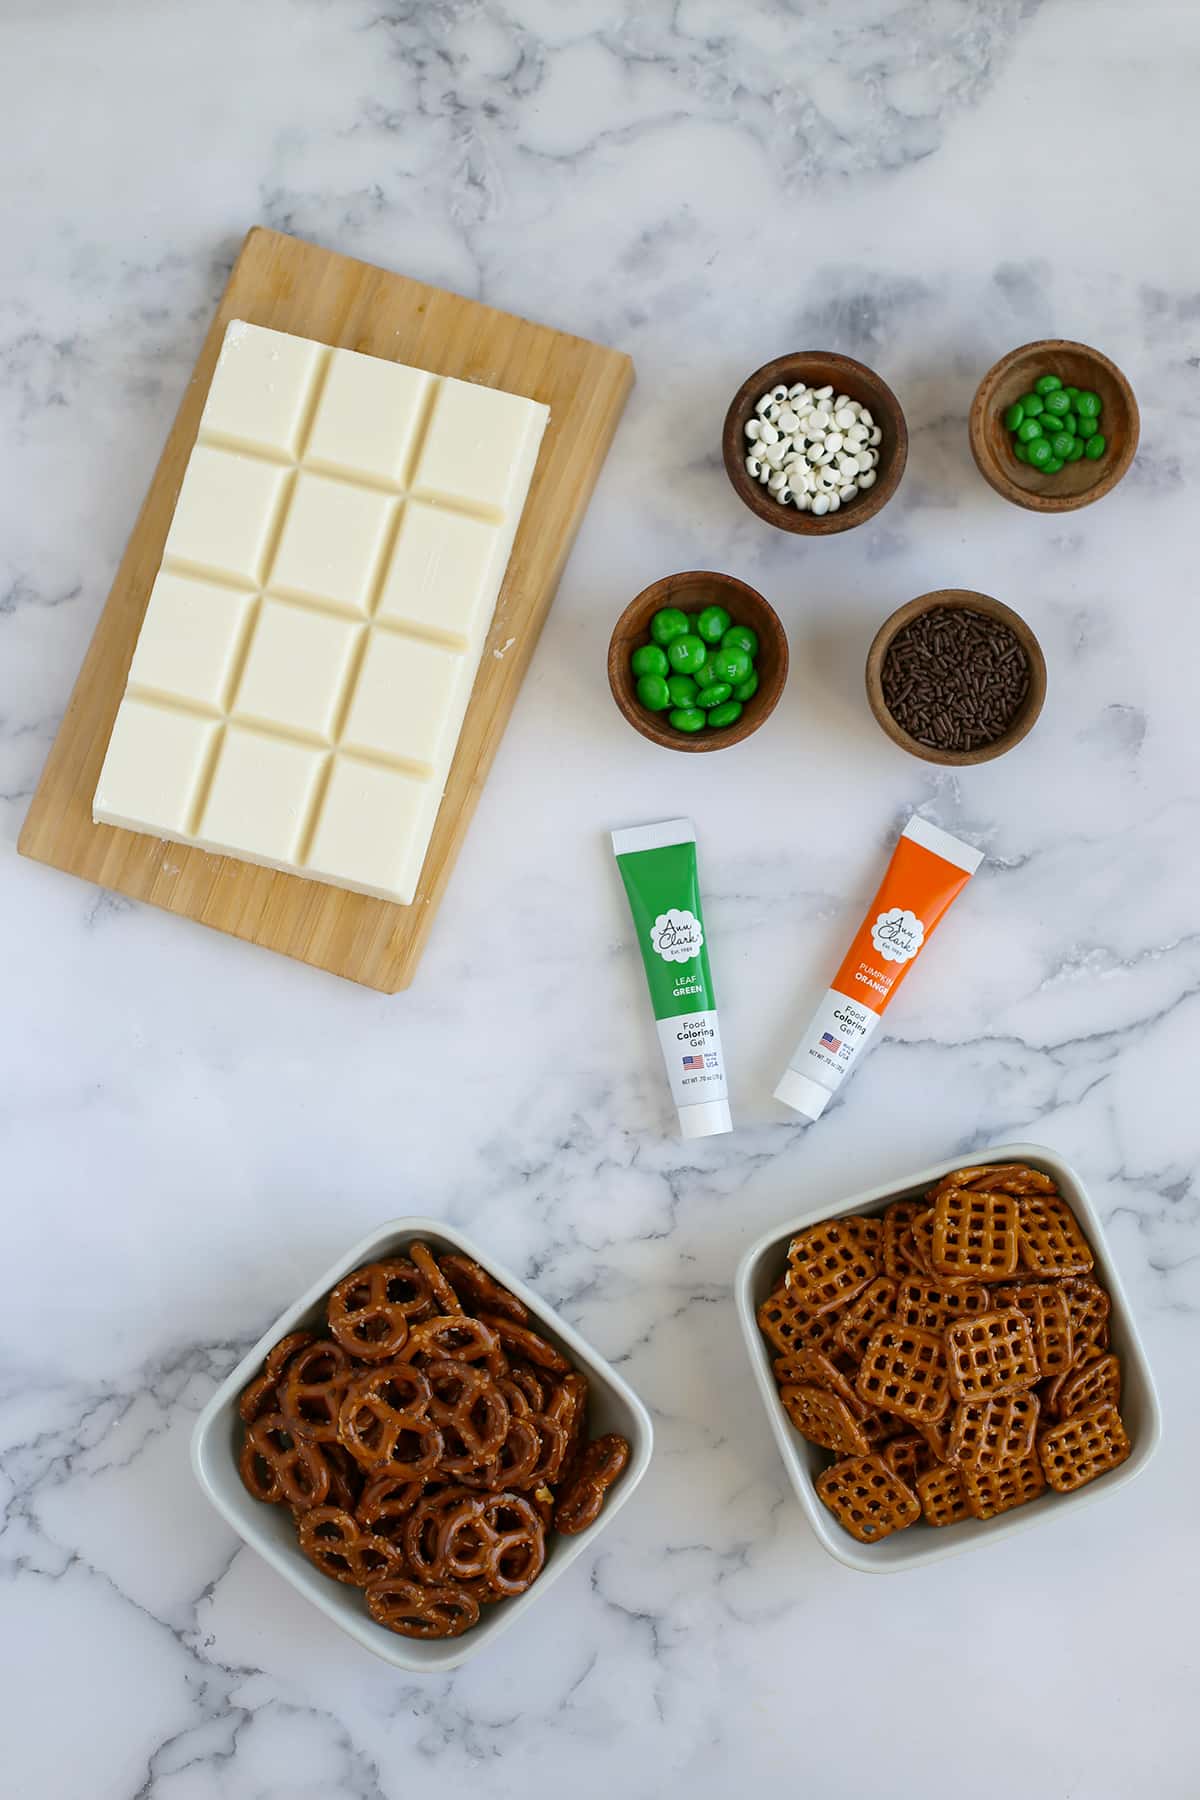 Ingredients you need to make c،colate dipped halloween pretzels.